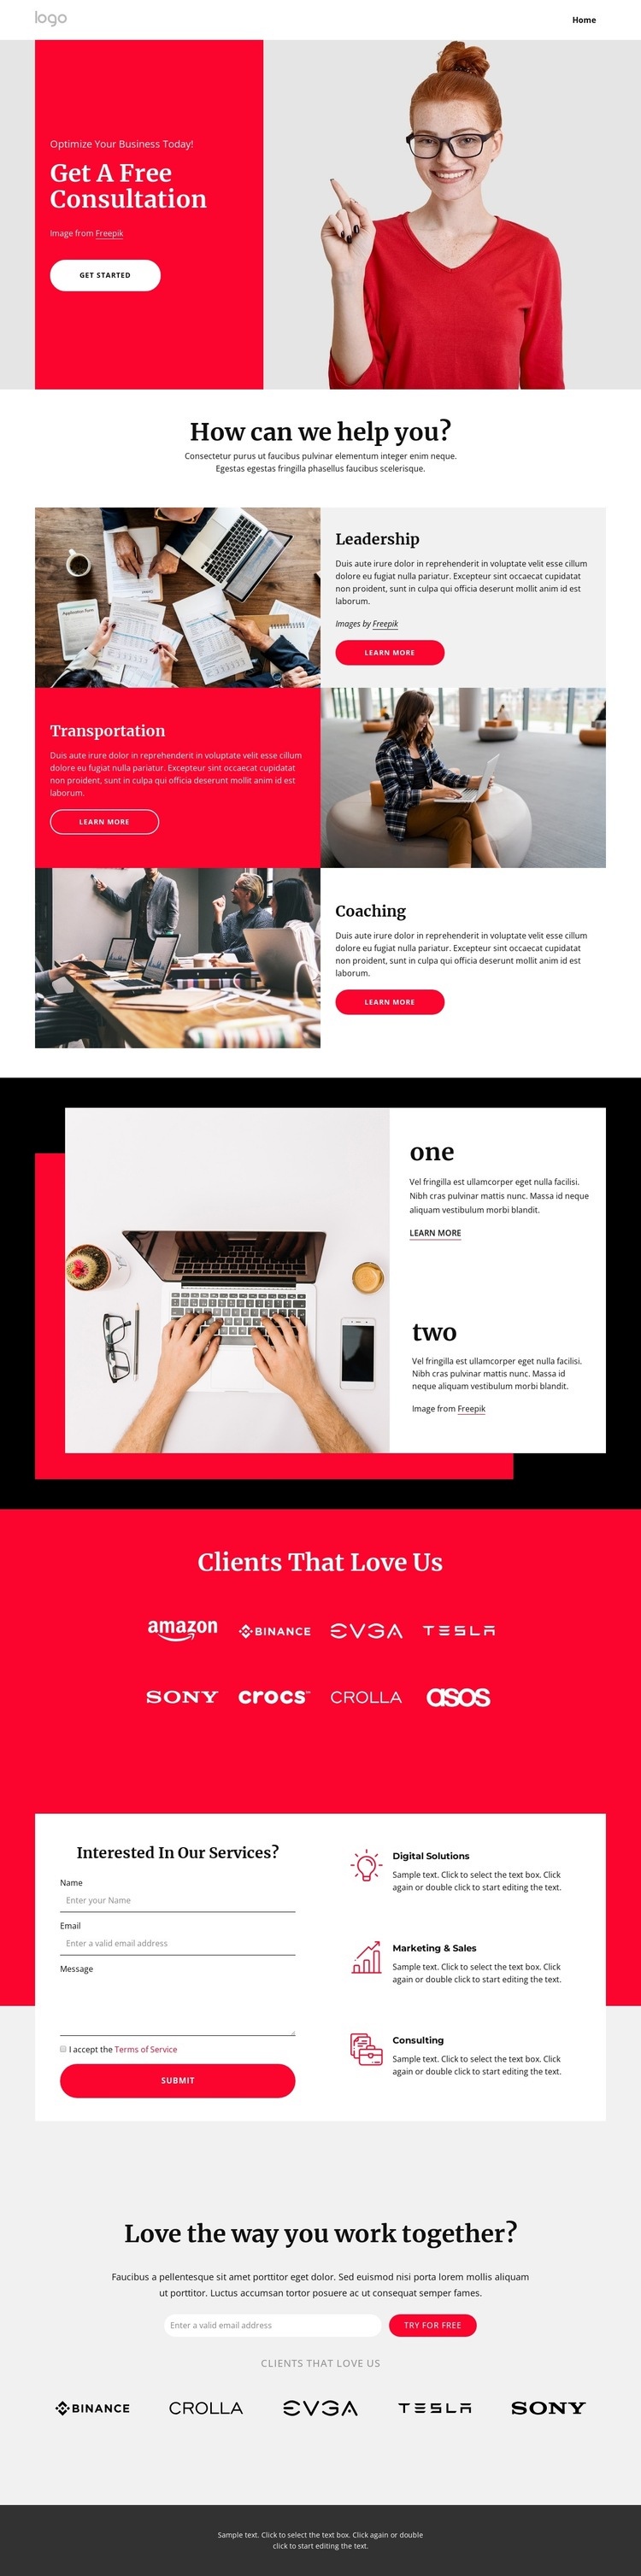 Business coaching and consulting Homepage Design